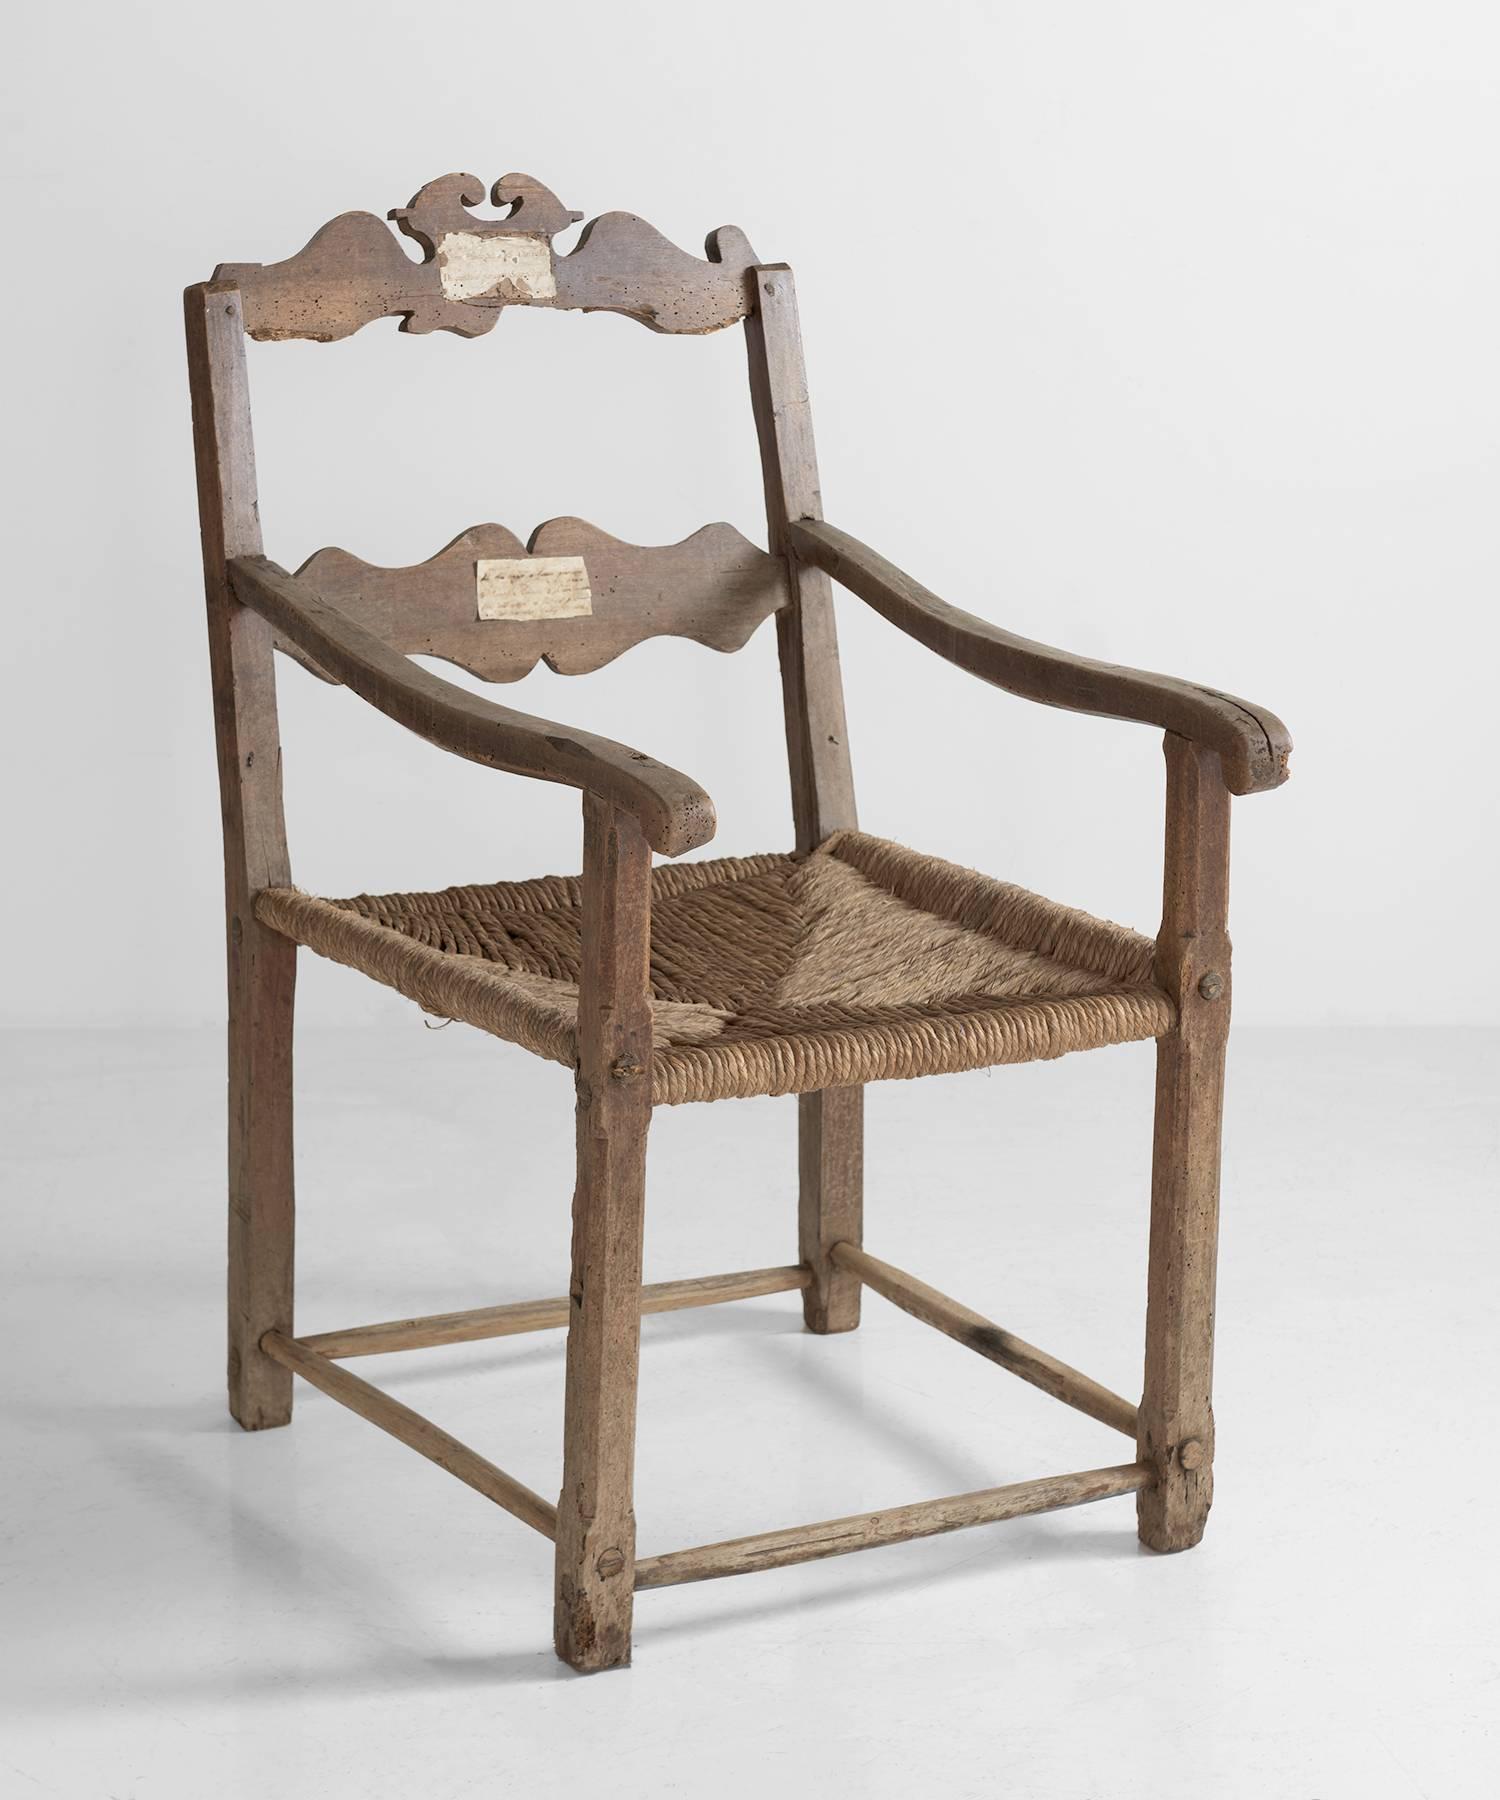 Oversized oak and rush seat farm chair, Italy, circa 1720.

Rush seated farm chair with oak frame, unusually tall and deep.